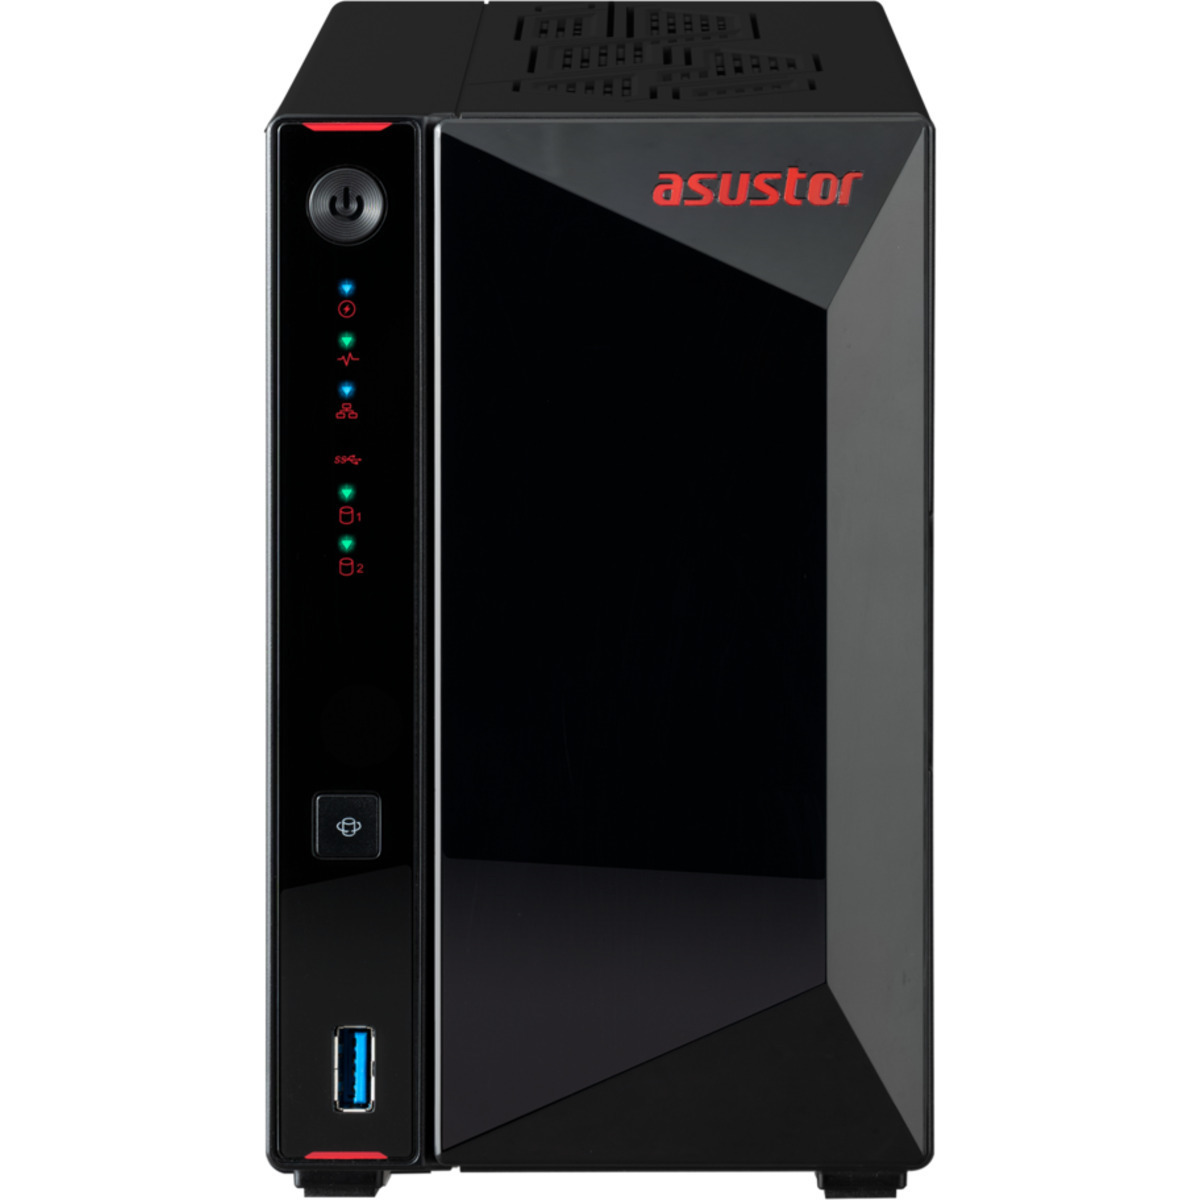 buy ASUSTOR Nimbustor 2 Gen2 AS5402T 8tb Desktop NAS - Network Attached Storage Device 2x4000gb Toshiba MN Series MN08ADA400E 3.5 7200rpm SATA 6Gb/s HDD NAS Class Drives Installed - Burn-In Tested - ON SALE - FREE RAM UPGRADE - nas headquarters buy network attached storage server device das new raid-5 free shipping simply usa Nimbustor 2 Gen2 AS5402T